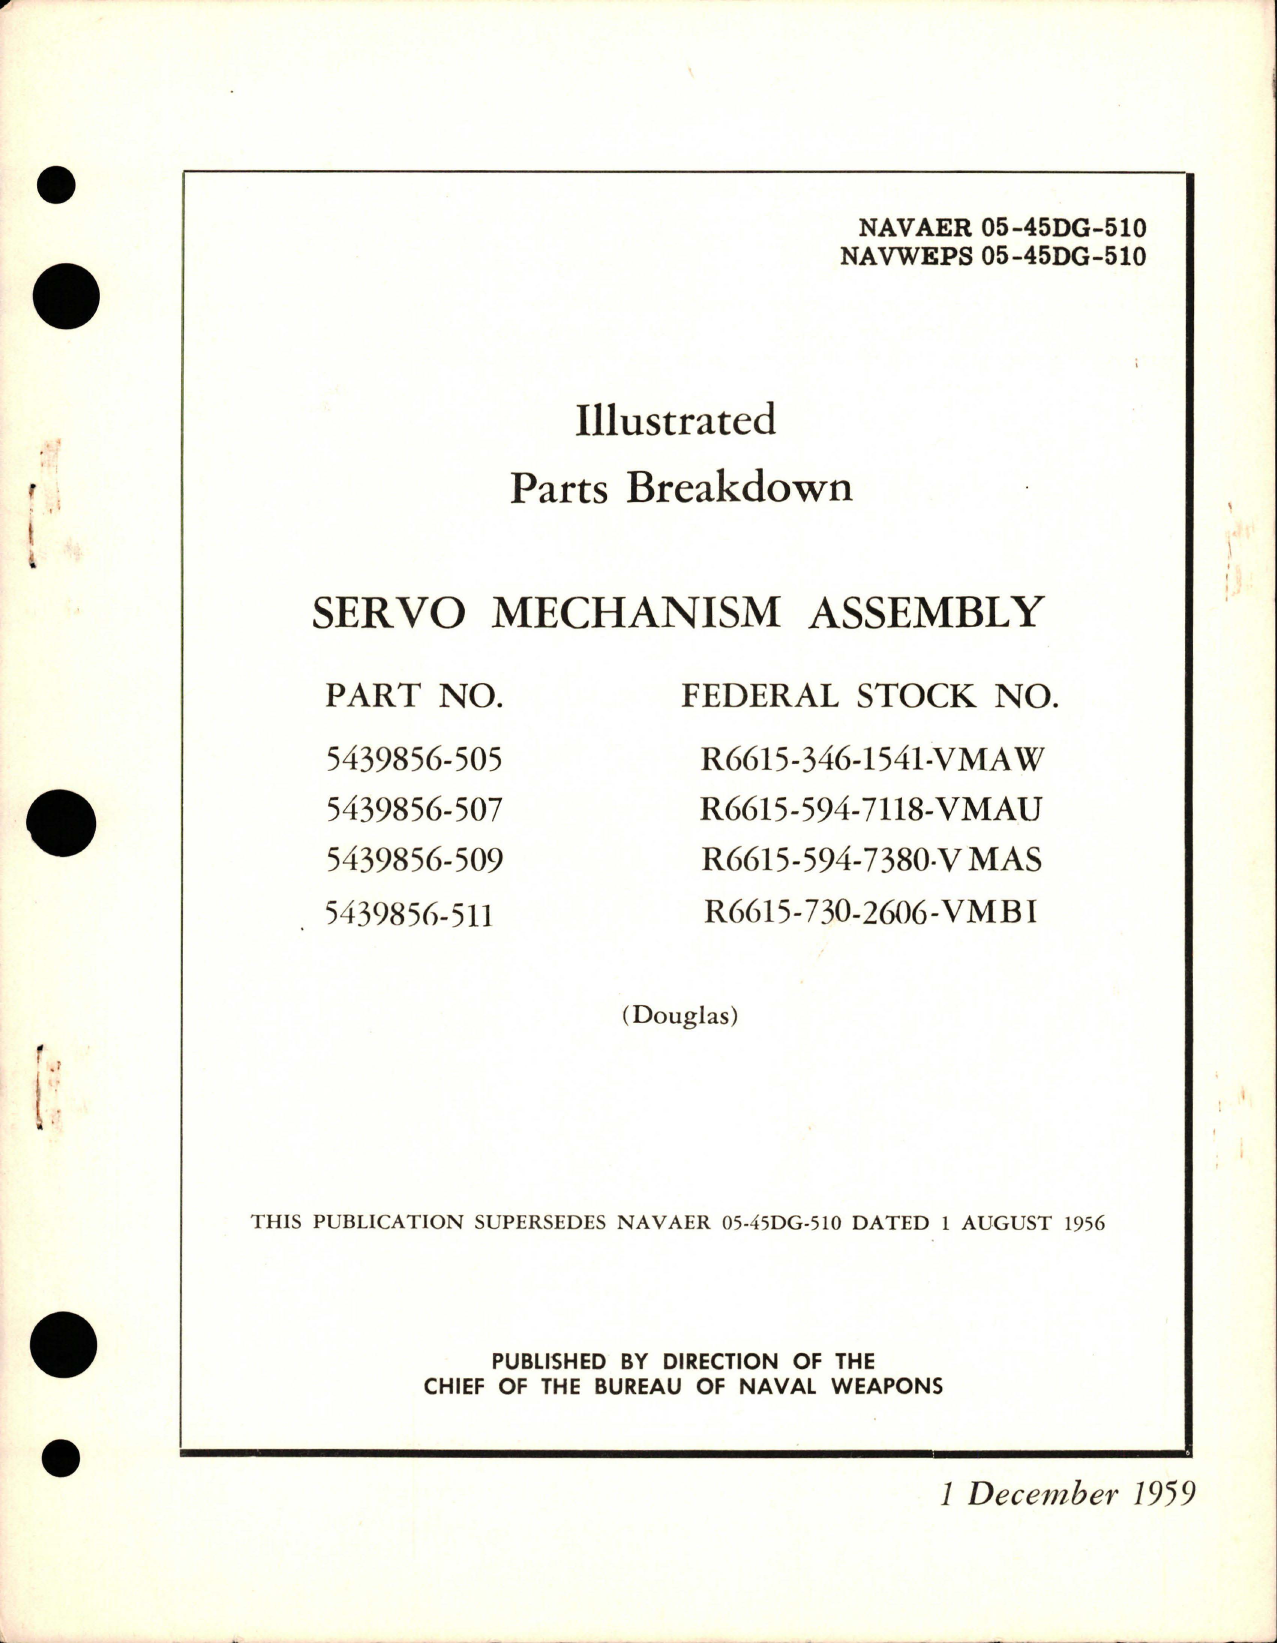 Sample page 1 from AirCorps Library document: Illustrated Parts Breakdown for Servo Mechanism Assembly